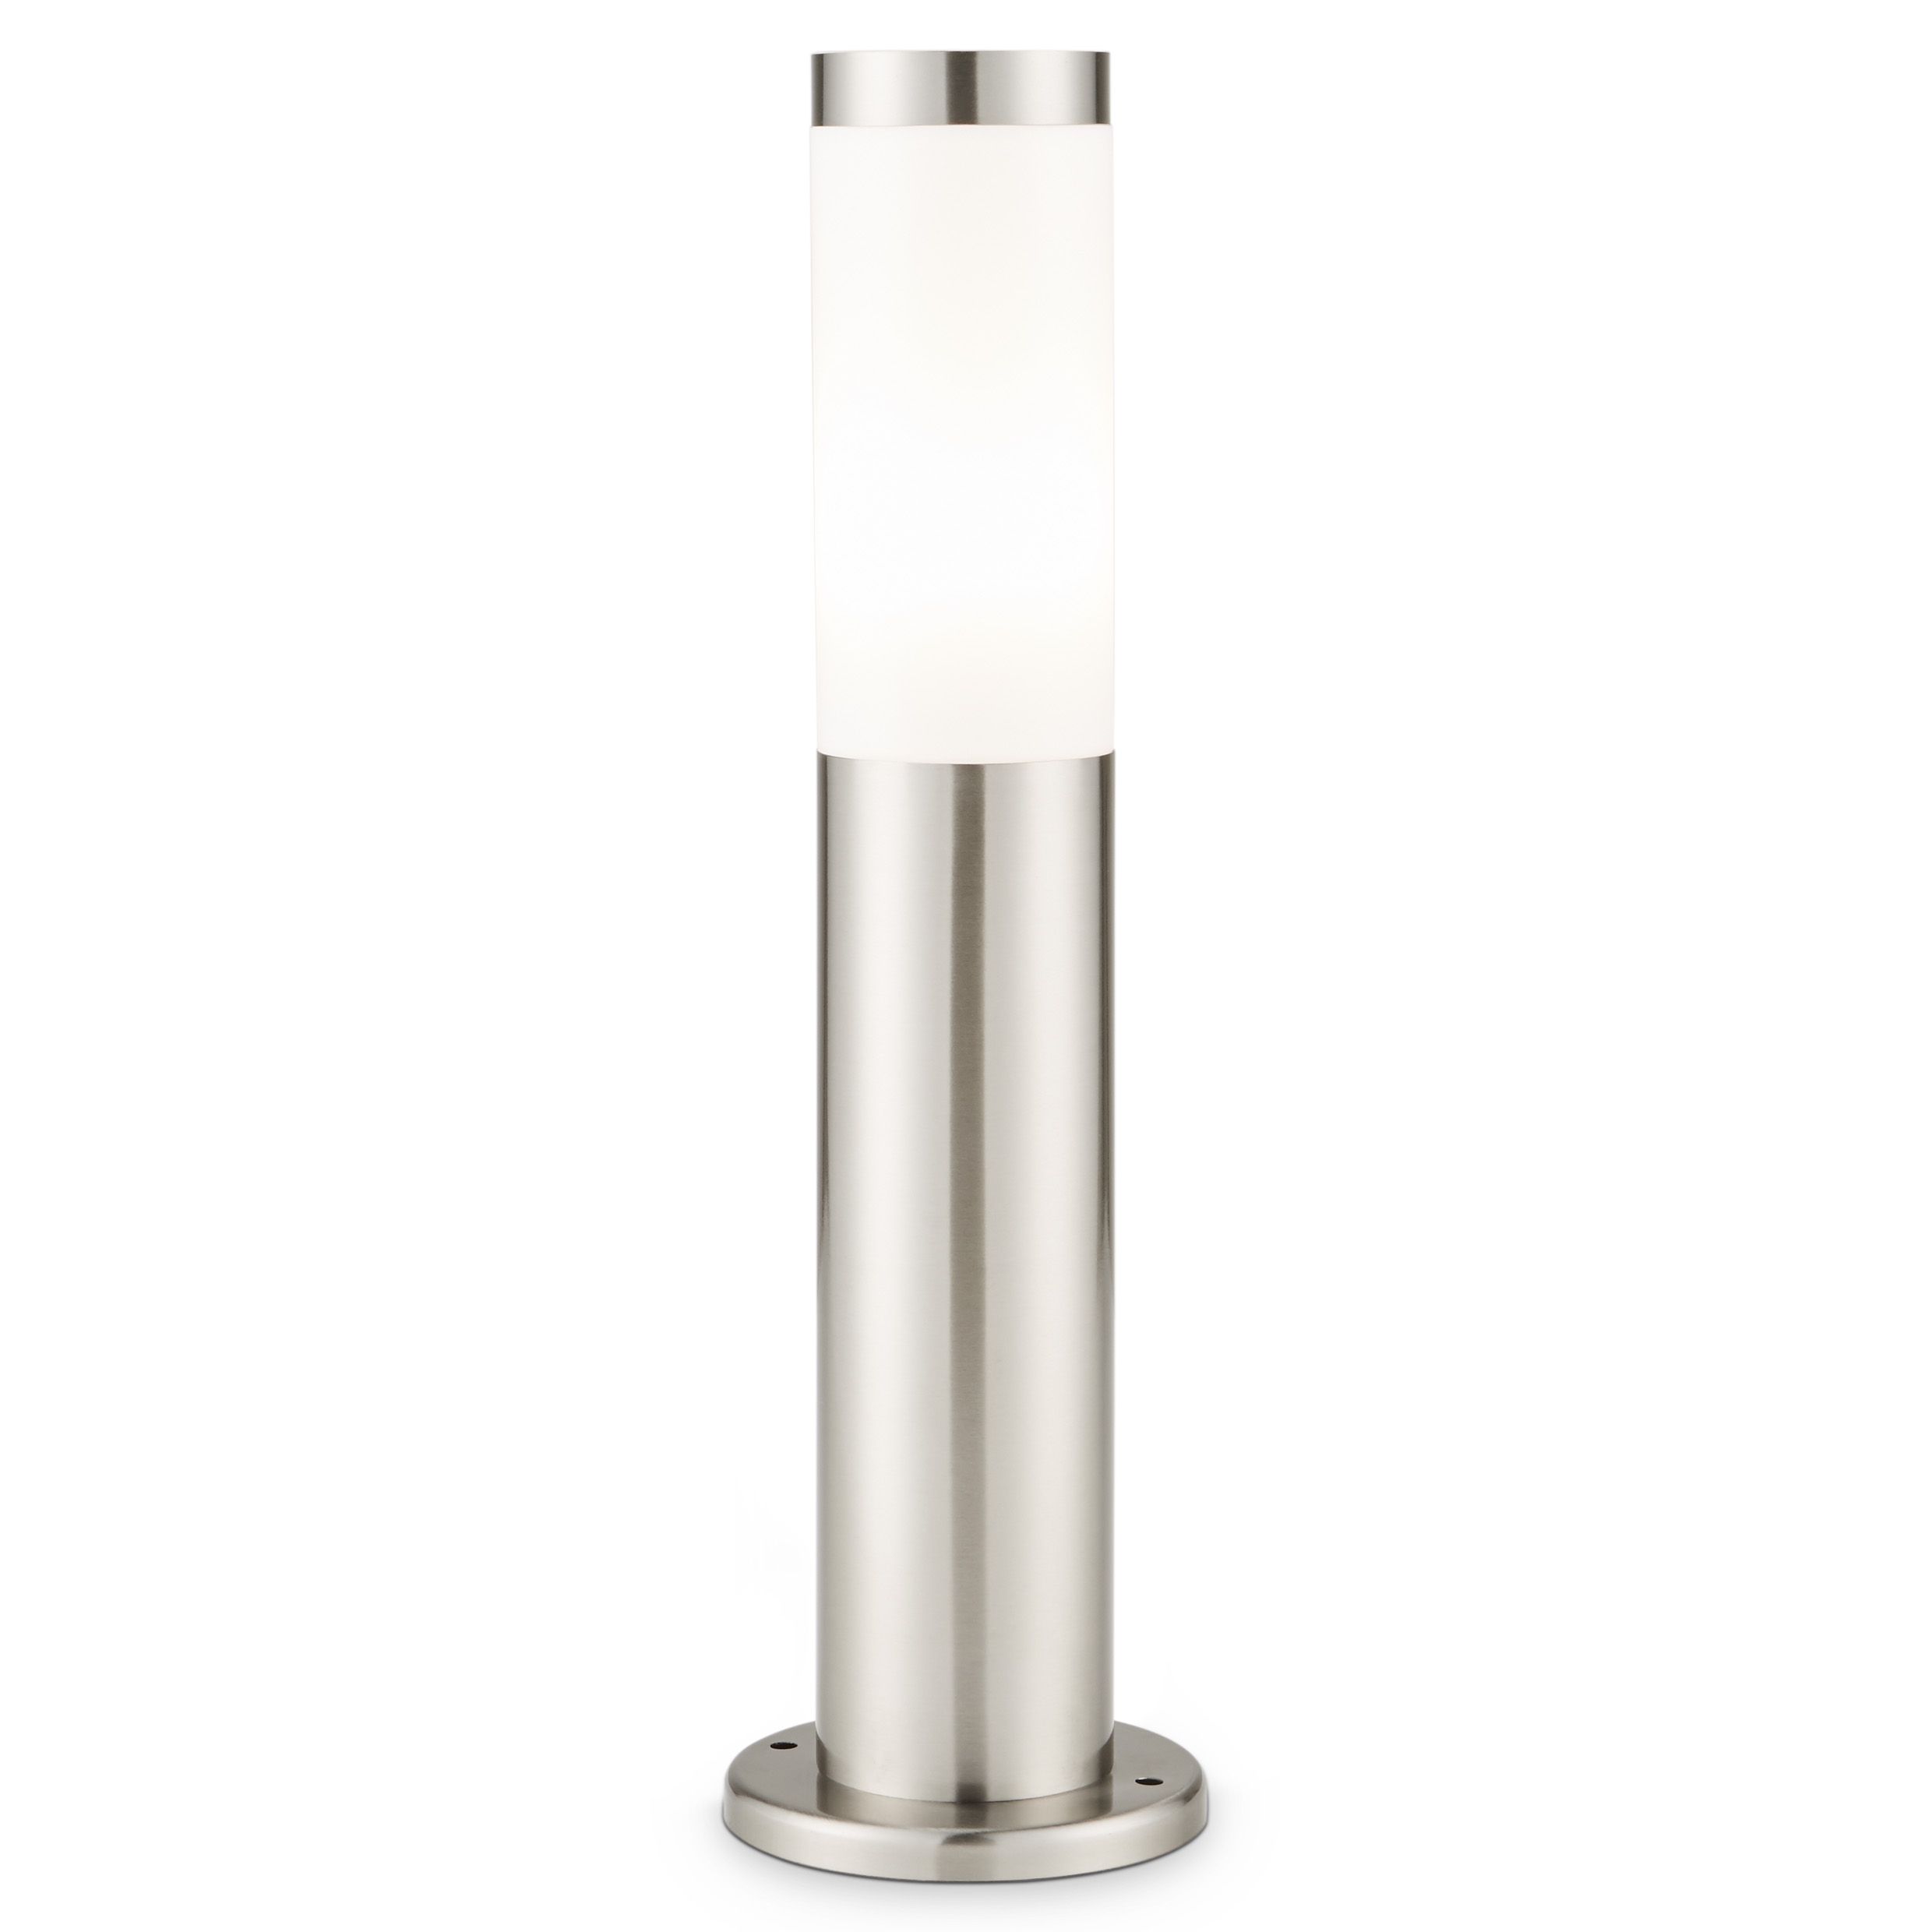 Blooma Hollis Silver effect Mains-powered 1 lamp Halogen Post light (H)450mm